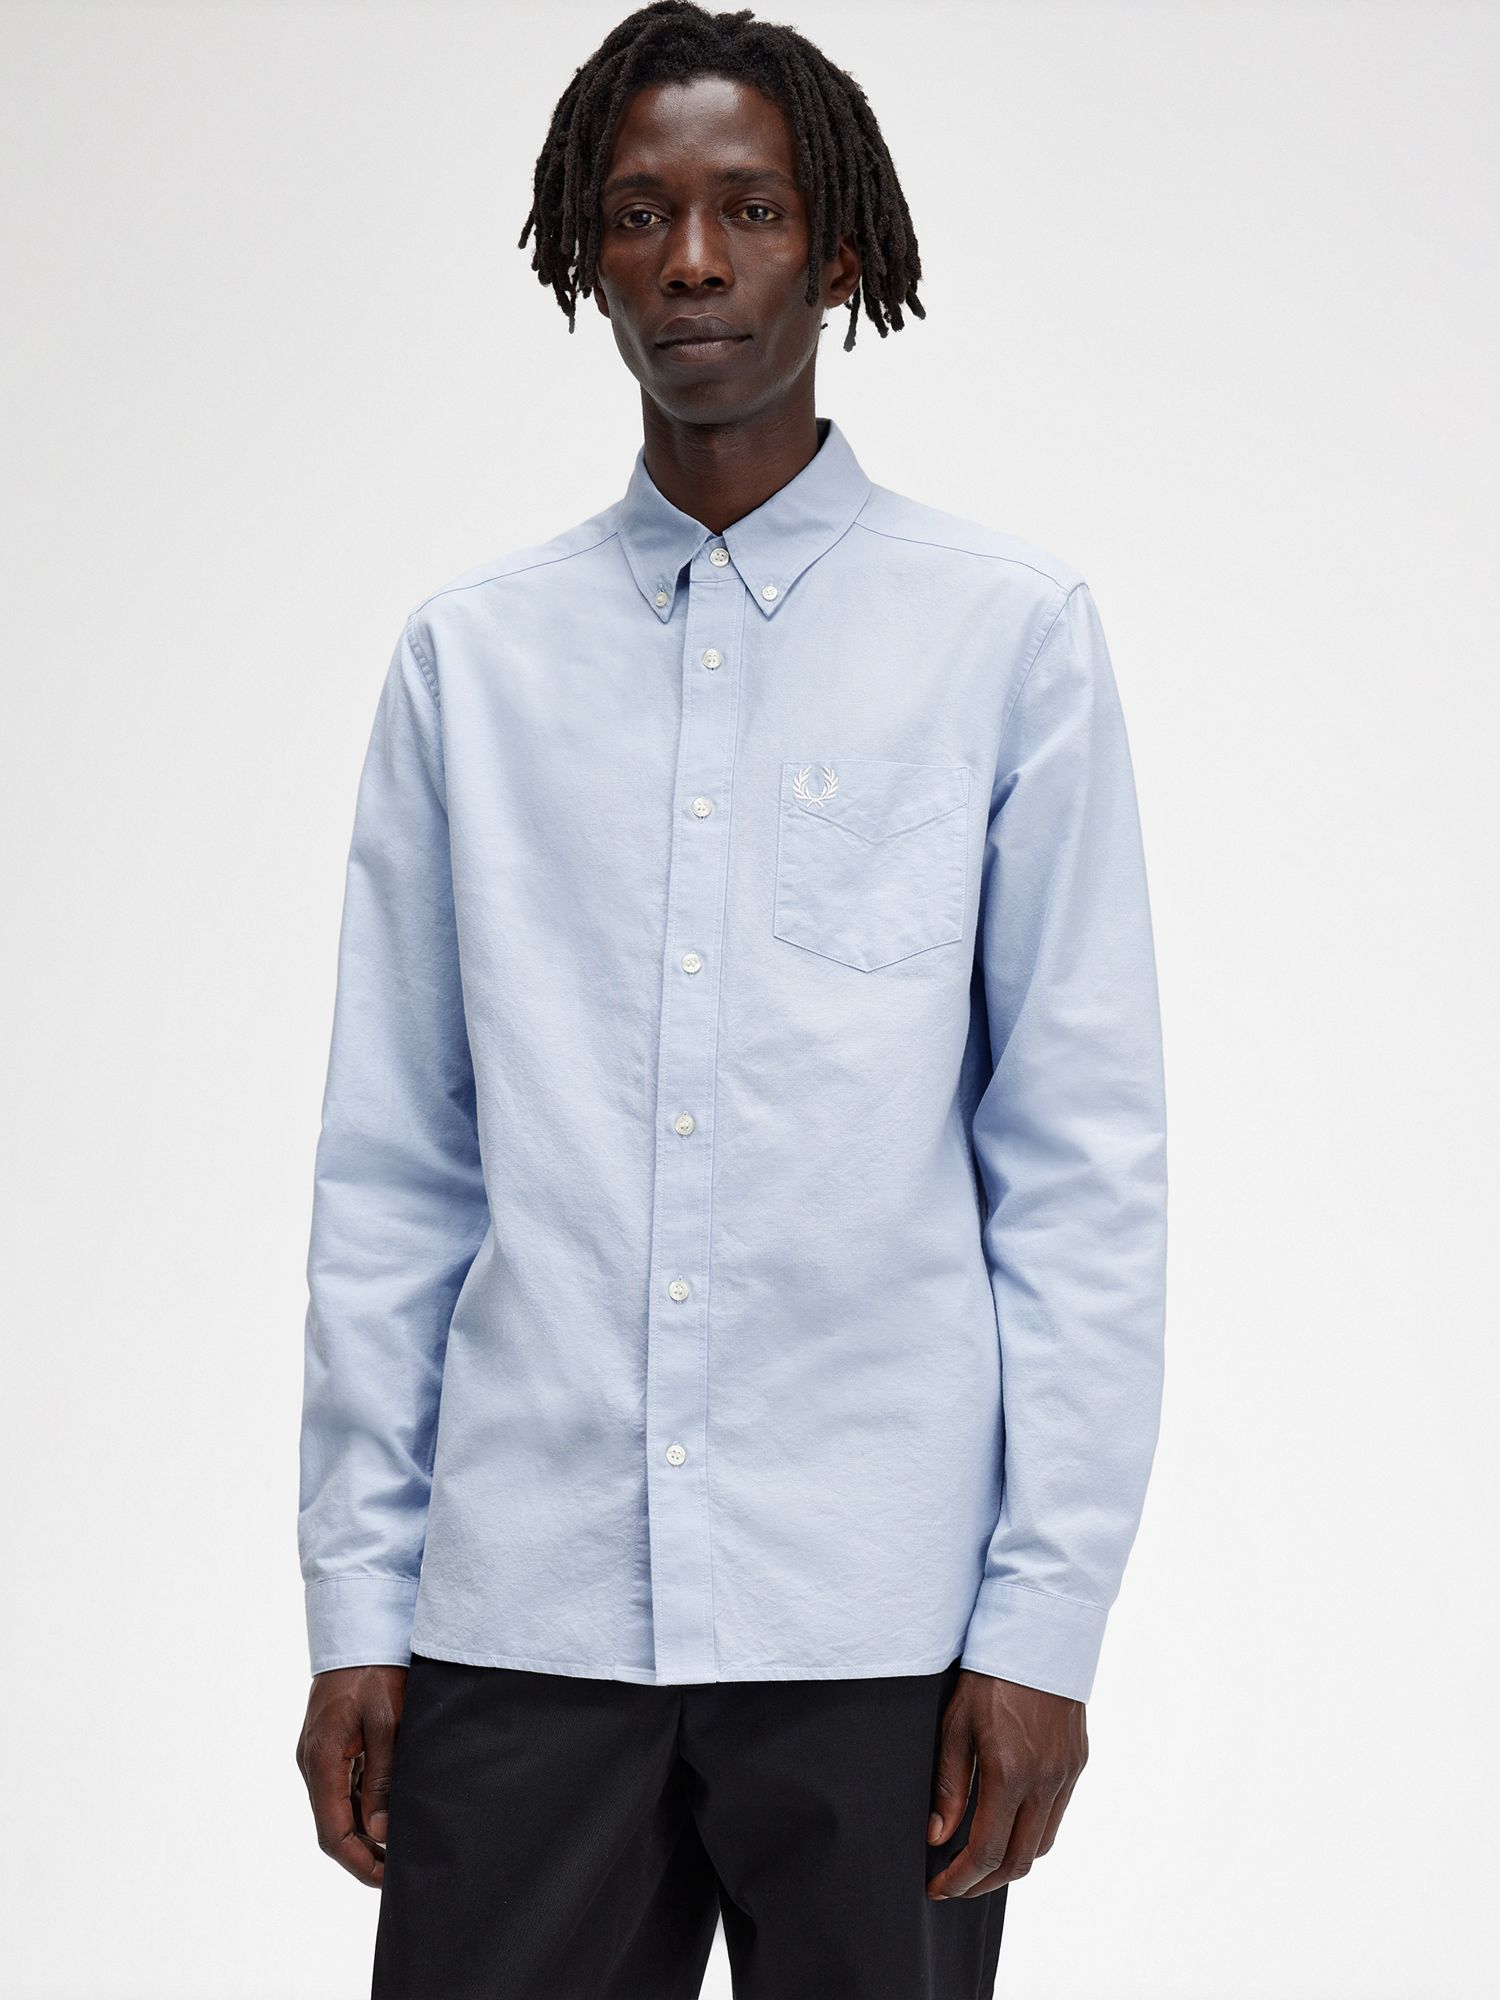 Fred Perry Oxford Shirt, 146 Blue, S